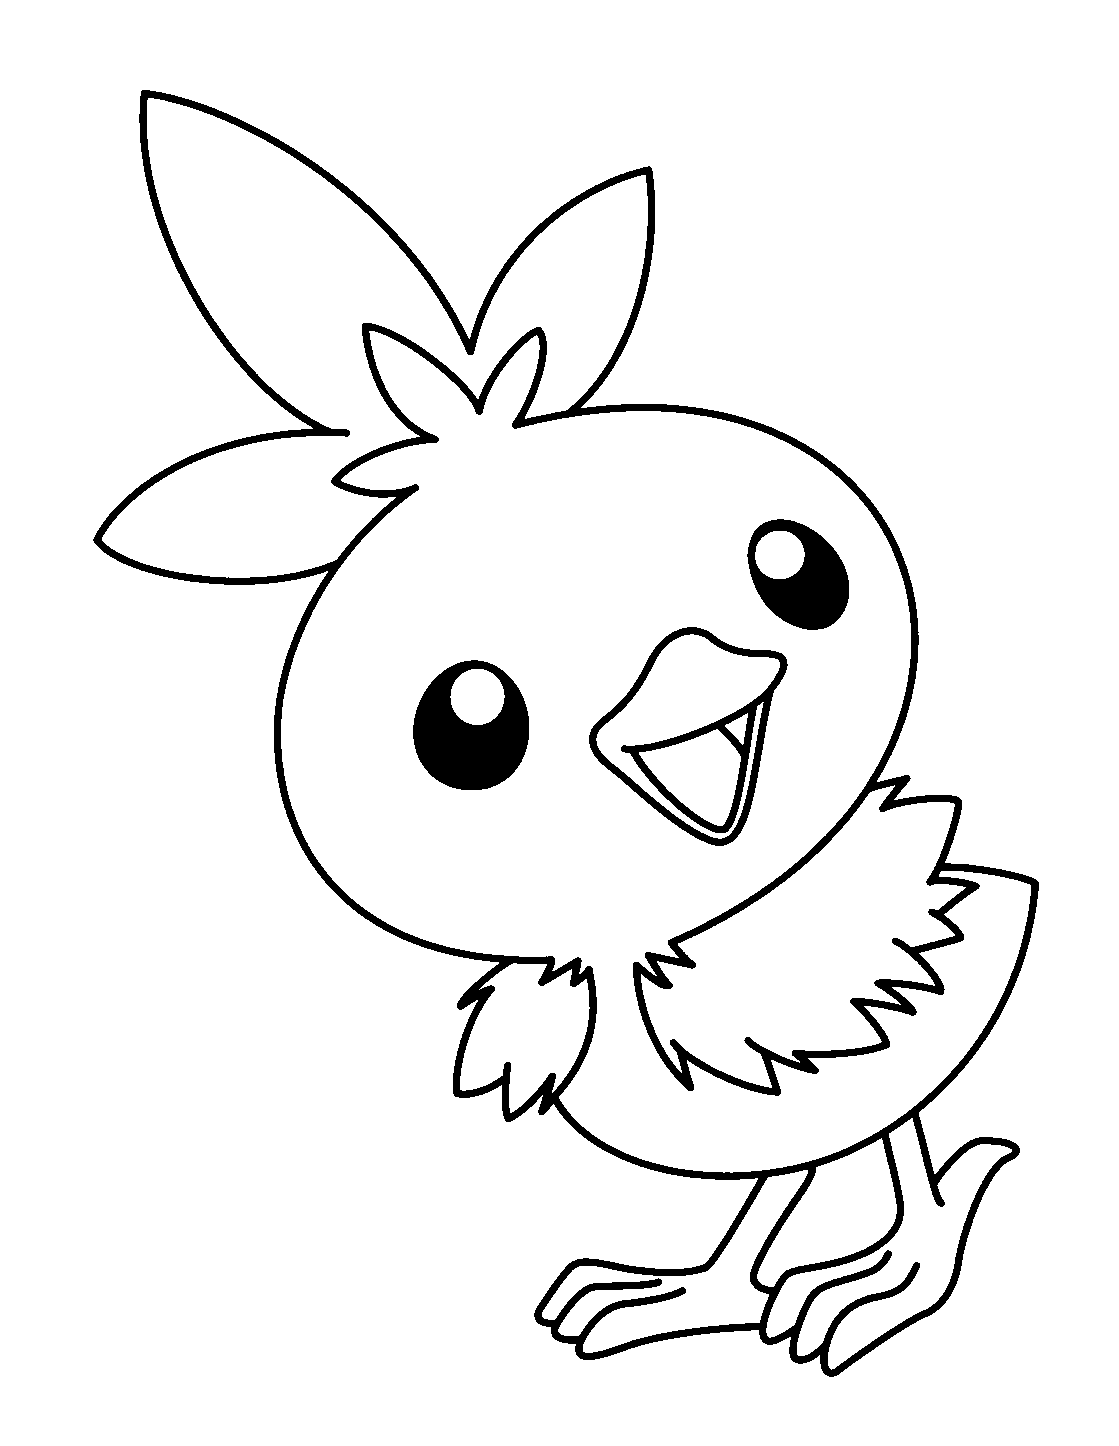 Mudkip and Torchic Coloring Page - Free Printable Coloring Pages for Kids